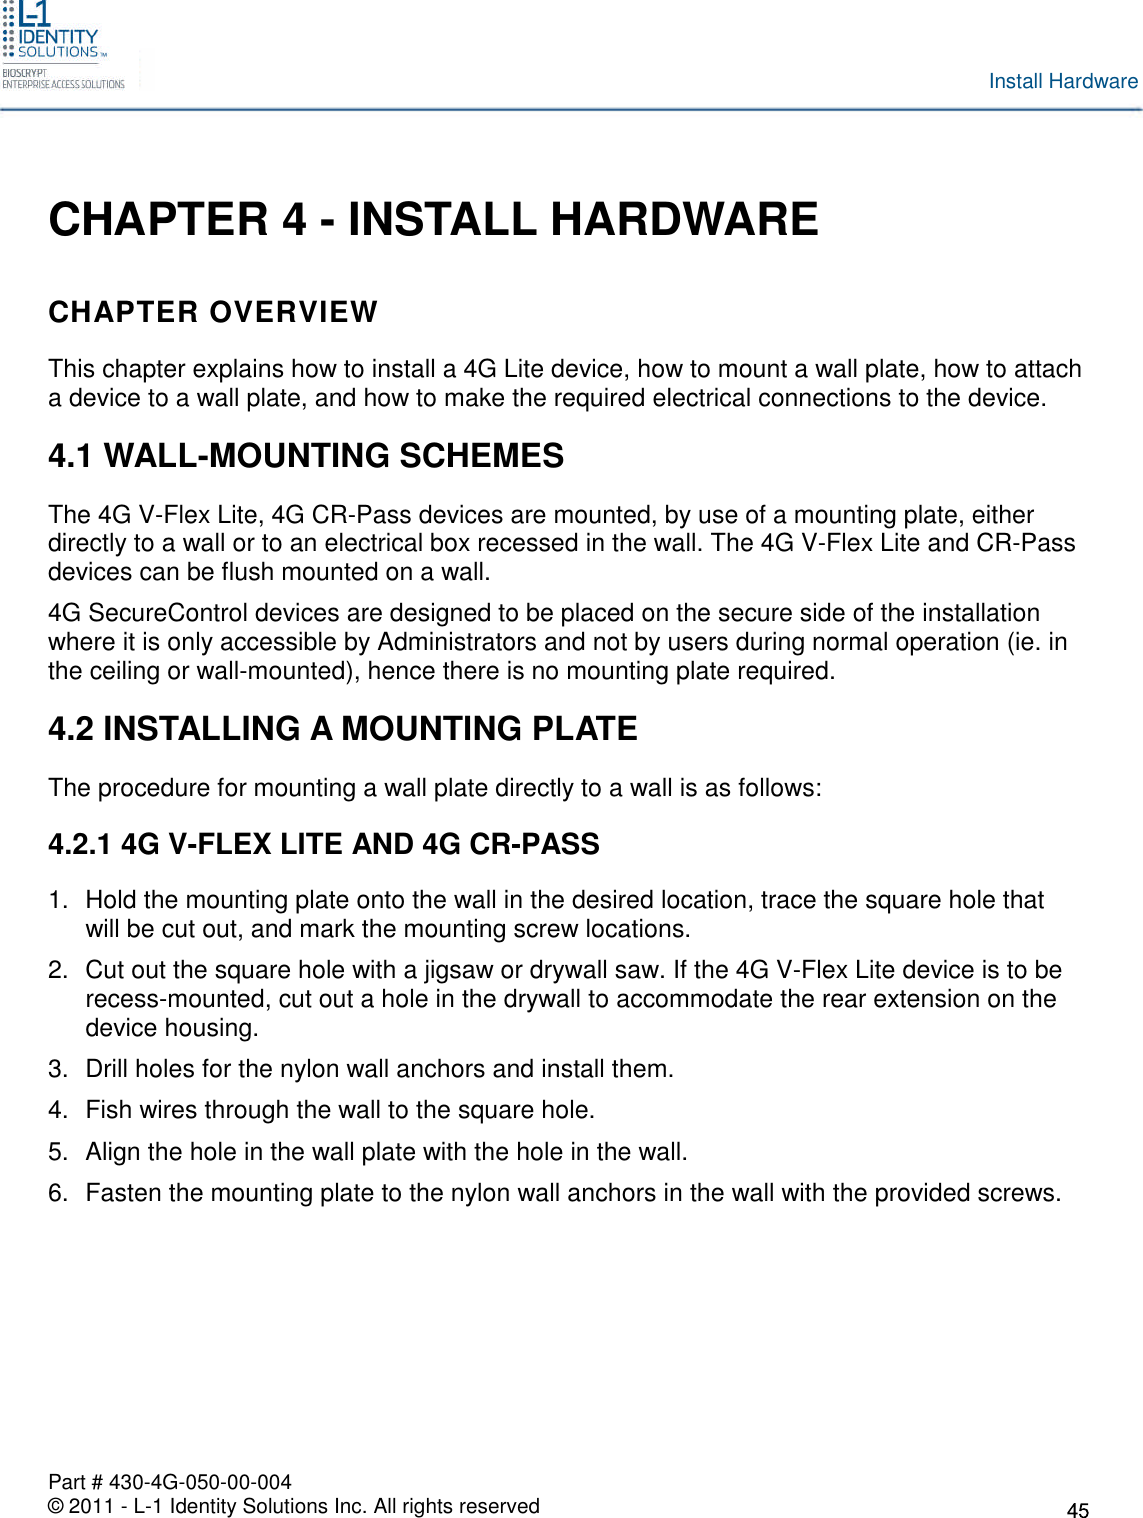 Part # 430-4G-050-00-004© 2011 - L-1 Identity Solutions Inc. All rights reservedInstall HardwareCHAPTER 4 - INSTALL HARDWARECHAPTER OVERVIEWThis chapter explains how to install a 4G Lite device, how to mount a wall plate, how to attacha device to a wall plate, and how to make the required electrical connections to the device.4.1 WALL-MOUNTING SCHEMESThe 4G V-Flex Lite, 4G CR-Pass devices are mounted, by use of a mounting plate, eitherdirectly to a wall or to an electrical box recessed in the wall. The 4G V-Flex Lite and CR-Passdevices can be flush mounted on a wall.4G SecureControl devices are designed to be placed on the secure side of the installationwhere it is only accessible by Administrators and not by users during normal operation (ie. inthe ceiling or wall-mounted), hence there is no mounting plate required.4.2 INSTALLING A MOUNTING PLATEThe procedure for mounting a wall plate directly to a wall is as follows:4.2.1 4G V-FLEX LITE AND 4G CR-PASS1. Hold the mounting plate onto the wall in the desired location, trace the square hole thatwill be cut out, and mark the mounting screw locations.2. Cut out the square hole with a jigsaw or drywall saw. If the 4G V-Flex Lite device is to berecess-mounted, cut out a hole in the drywall to accommodate the rear extension on thedevice housing.3. Drill holes for the nylon wall anchors and install them.4. Fish wires through the wall to the square hole.5. Align the hole in the wall plate with the hole in the wall.6. Fasten the mounting plate to the nylon wall anchors in the wall with the provided screws.